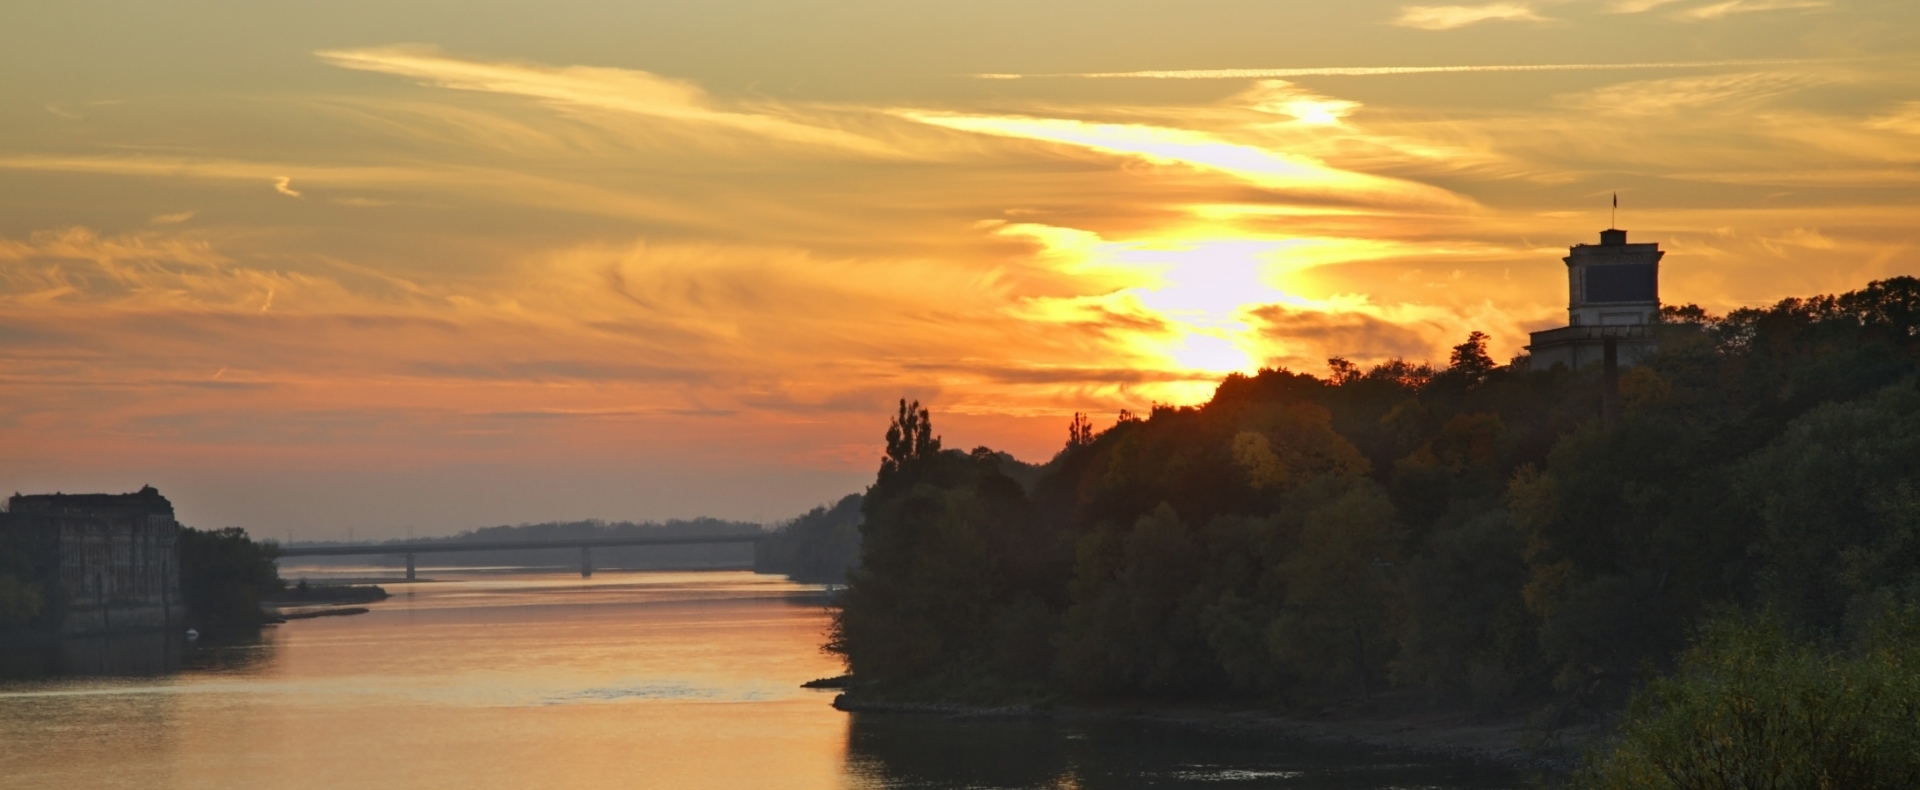 Sunset over the rivers Narew and Vistula